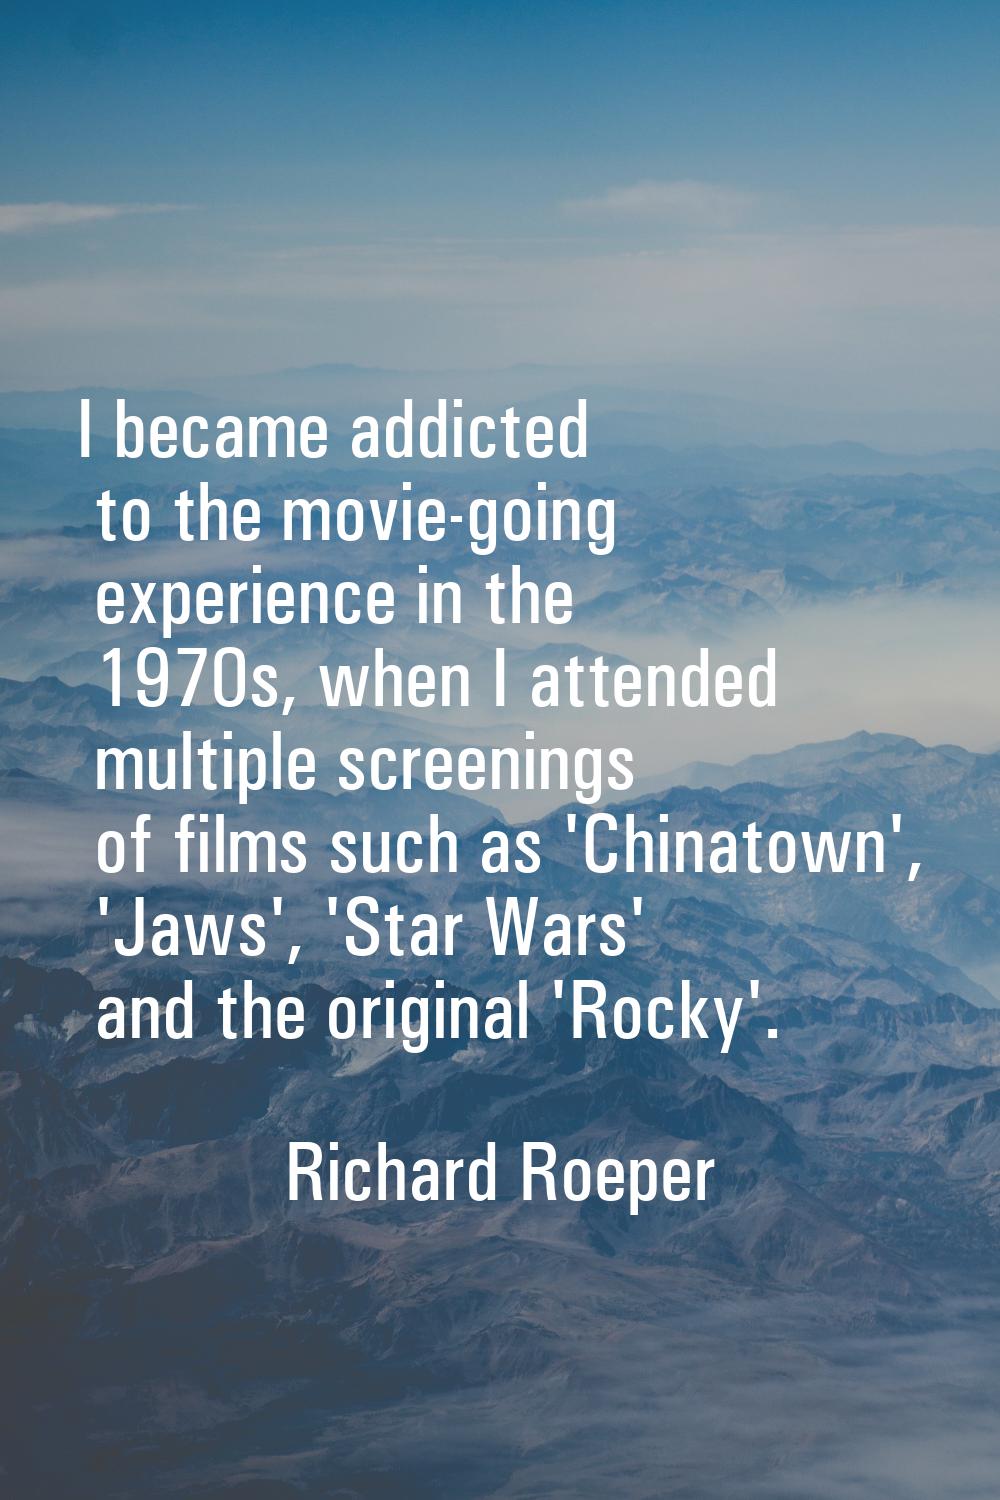 I became addicted to the movie-going experience in the 1970s, when I attended multiple screenings o